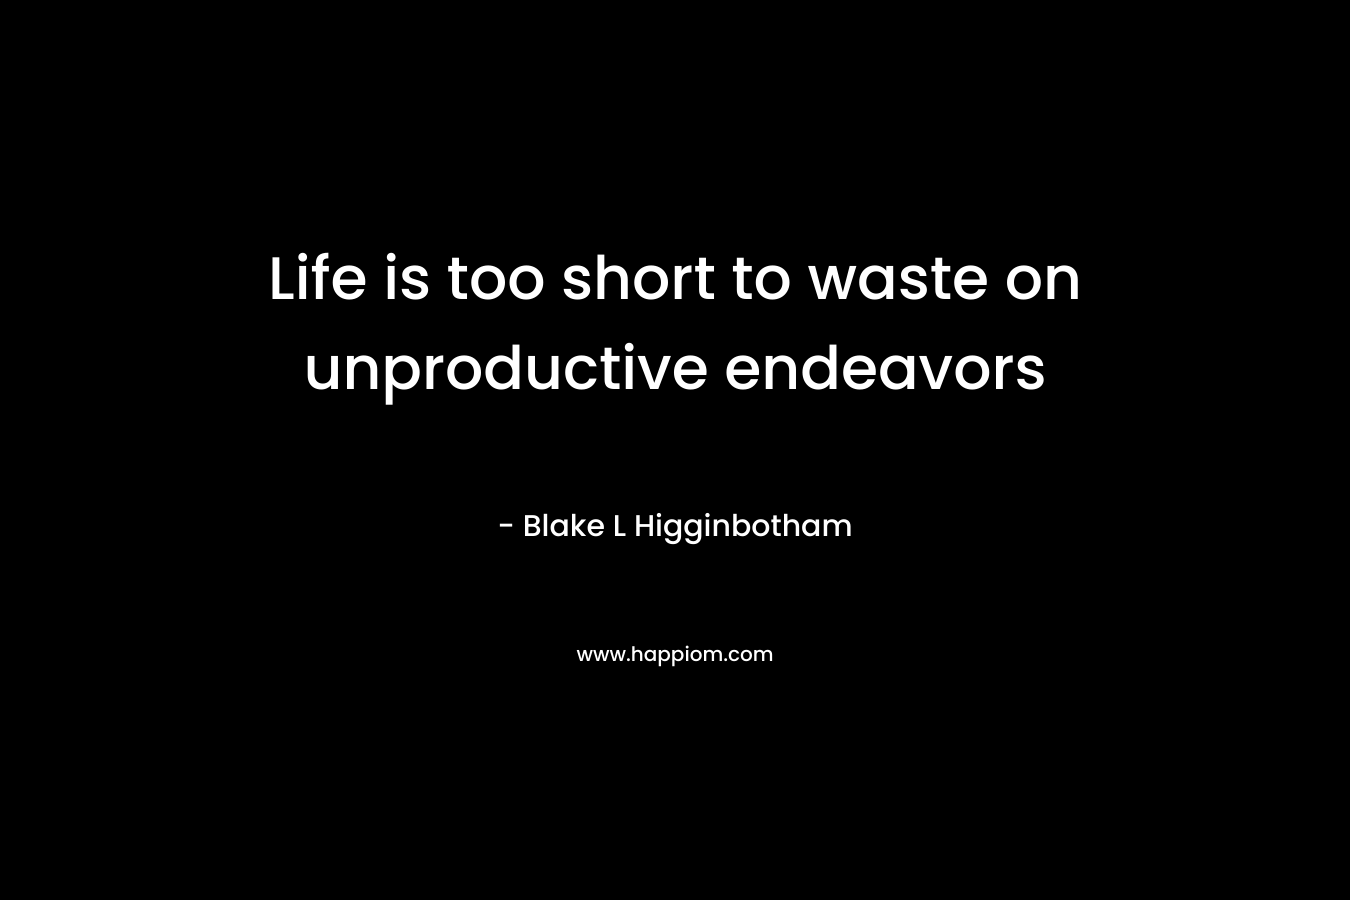 Life is too short to waste on unproductive endeavors